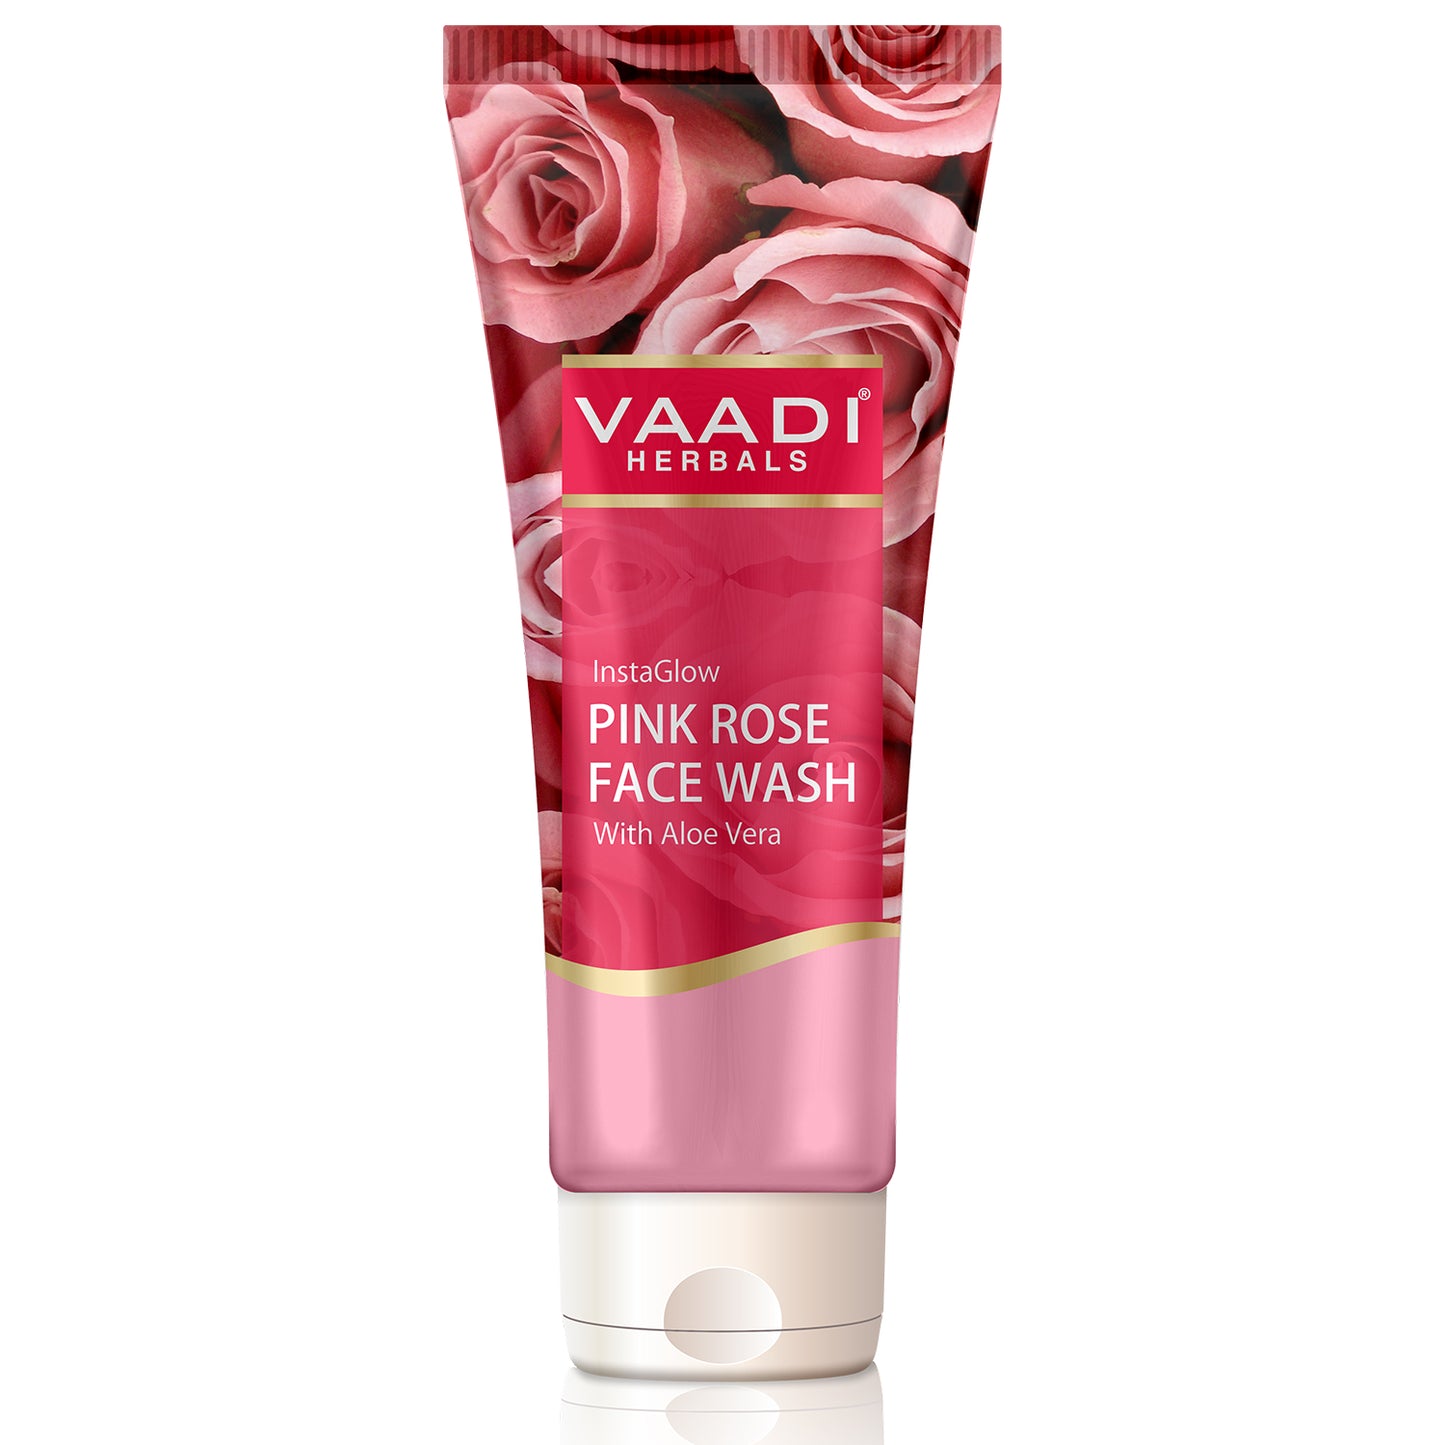 Insta Glow Pink Rose Face wash with Aloe vera extract (60 ml/2.1 fl oz)